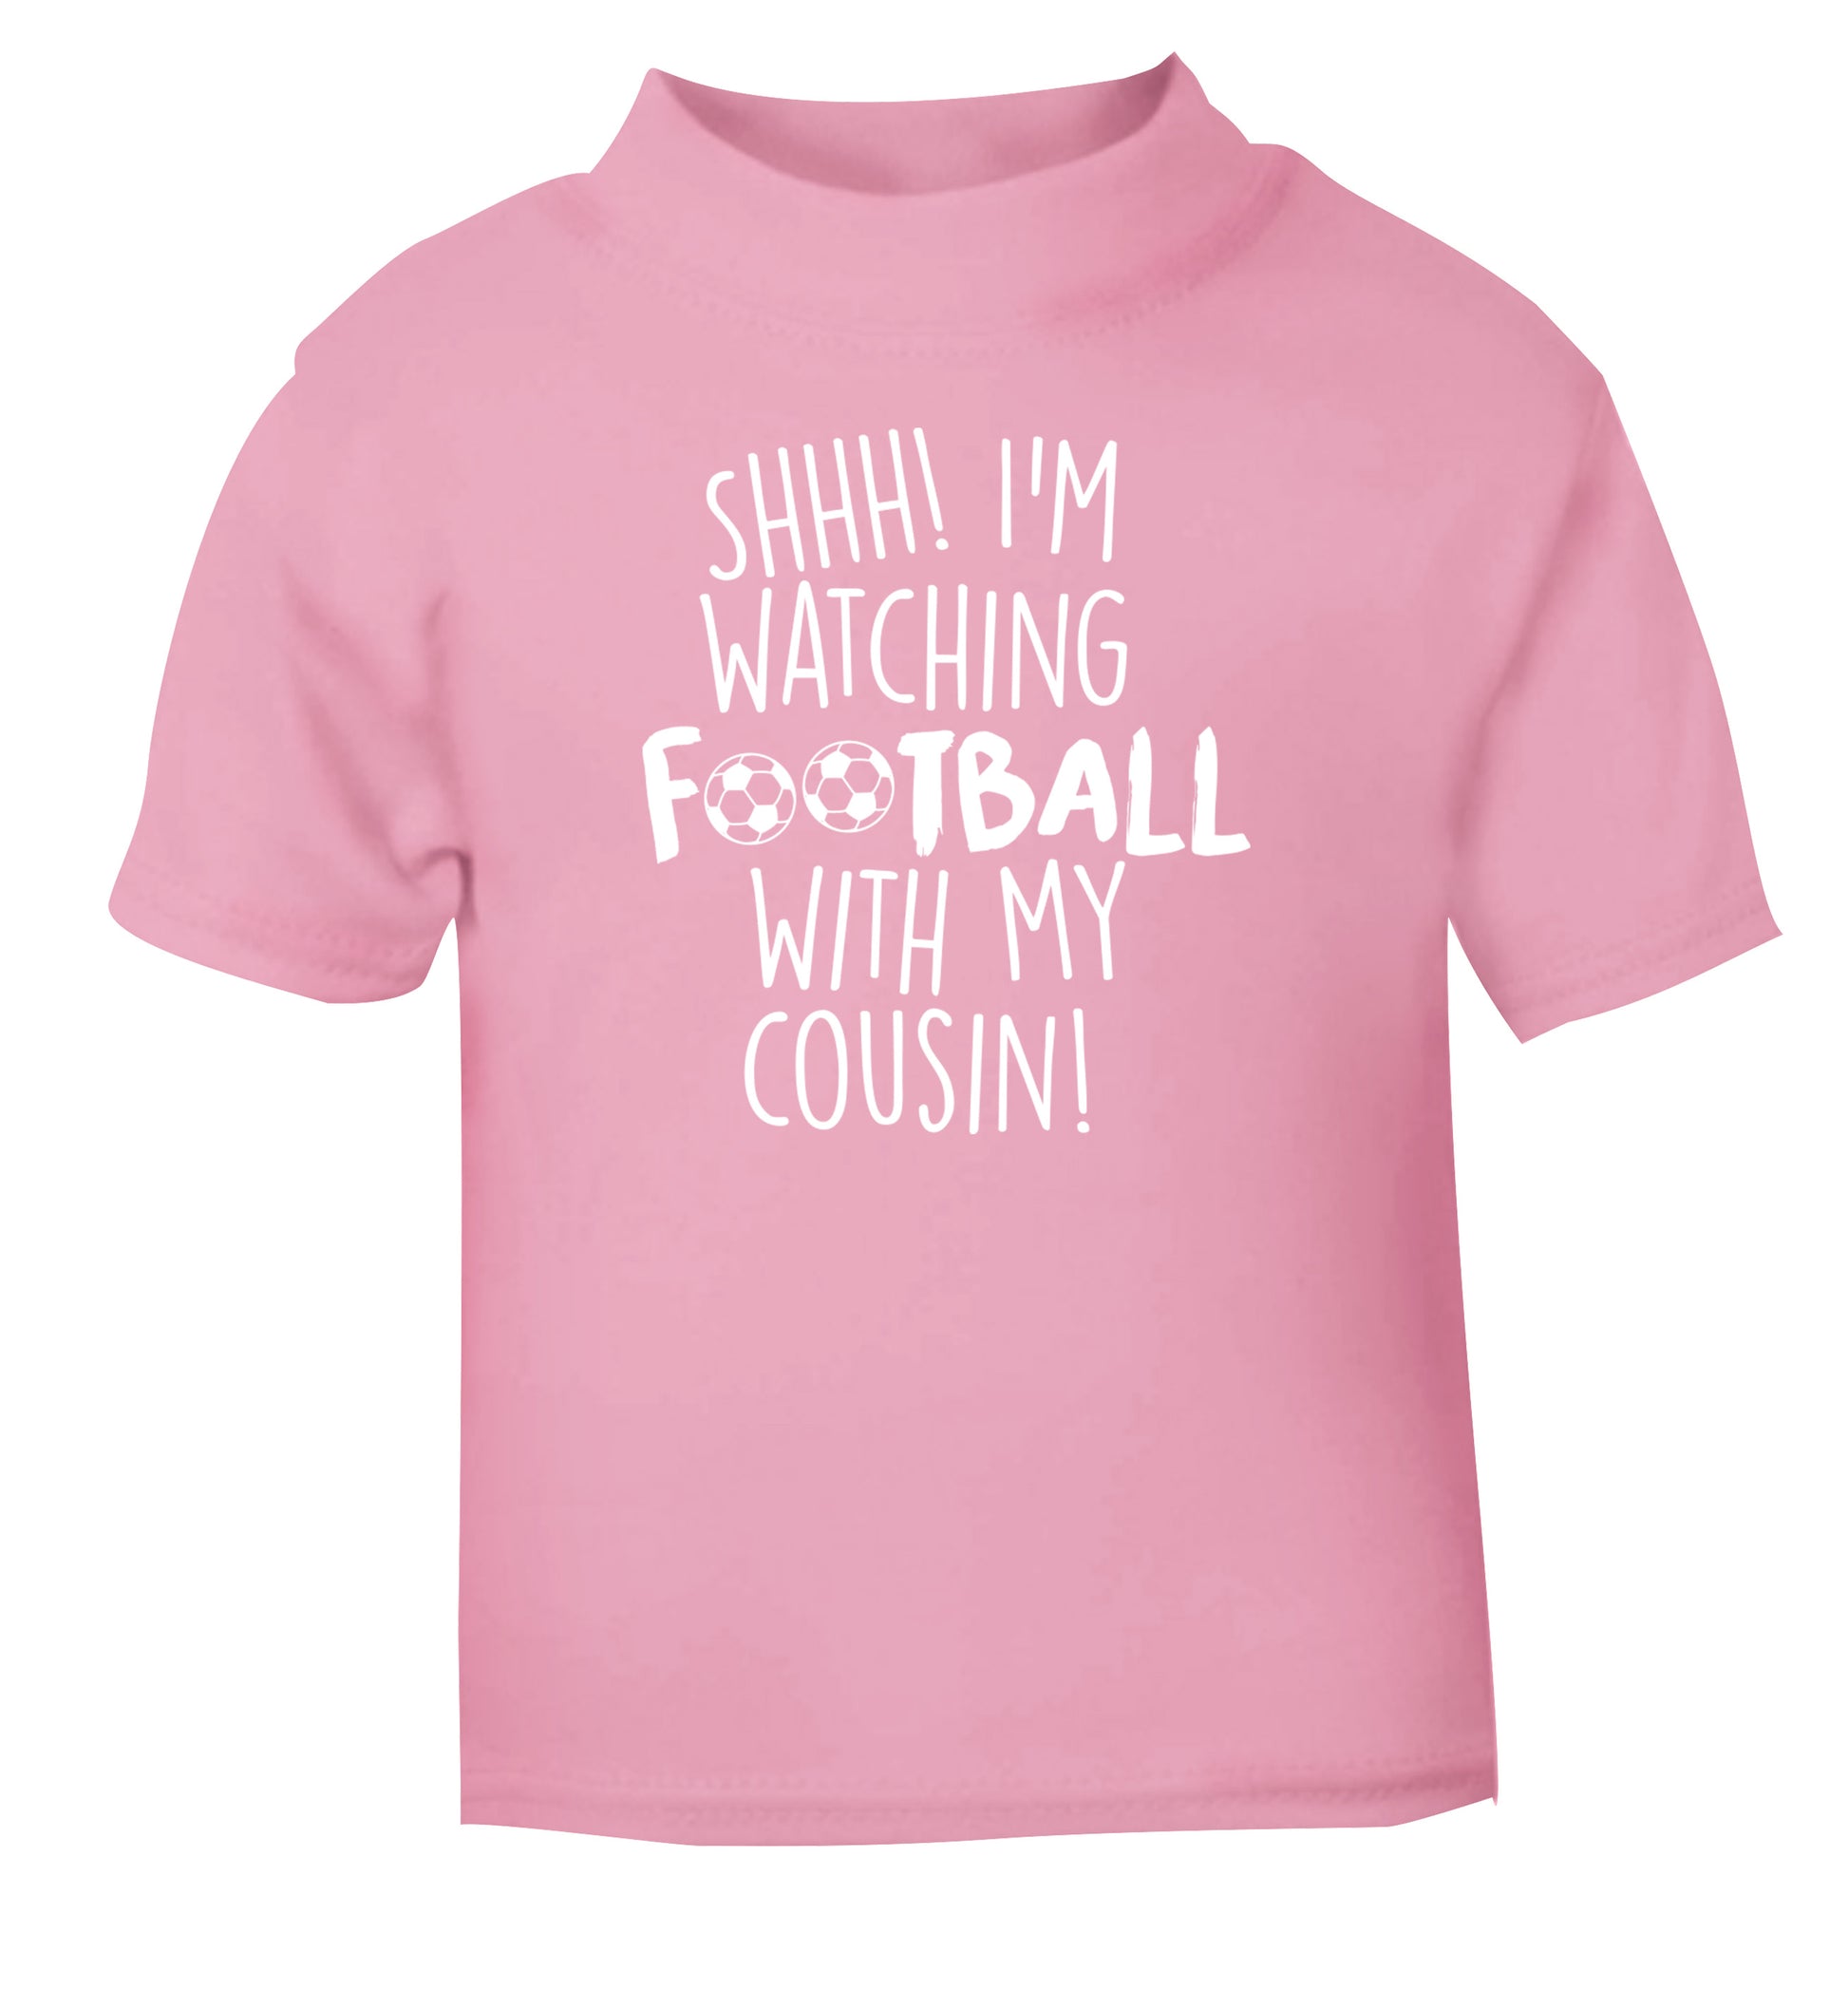 Shhh I'm watching football with my cousin light pink Baby Toddler Tshirt 2 Years